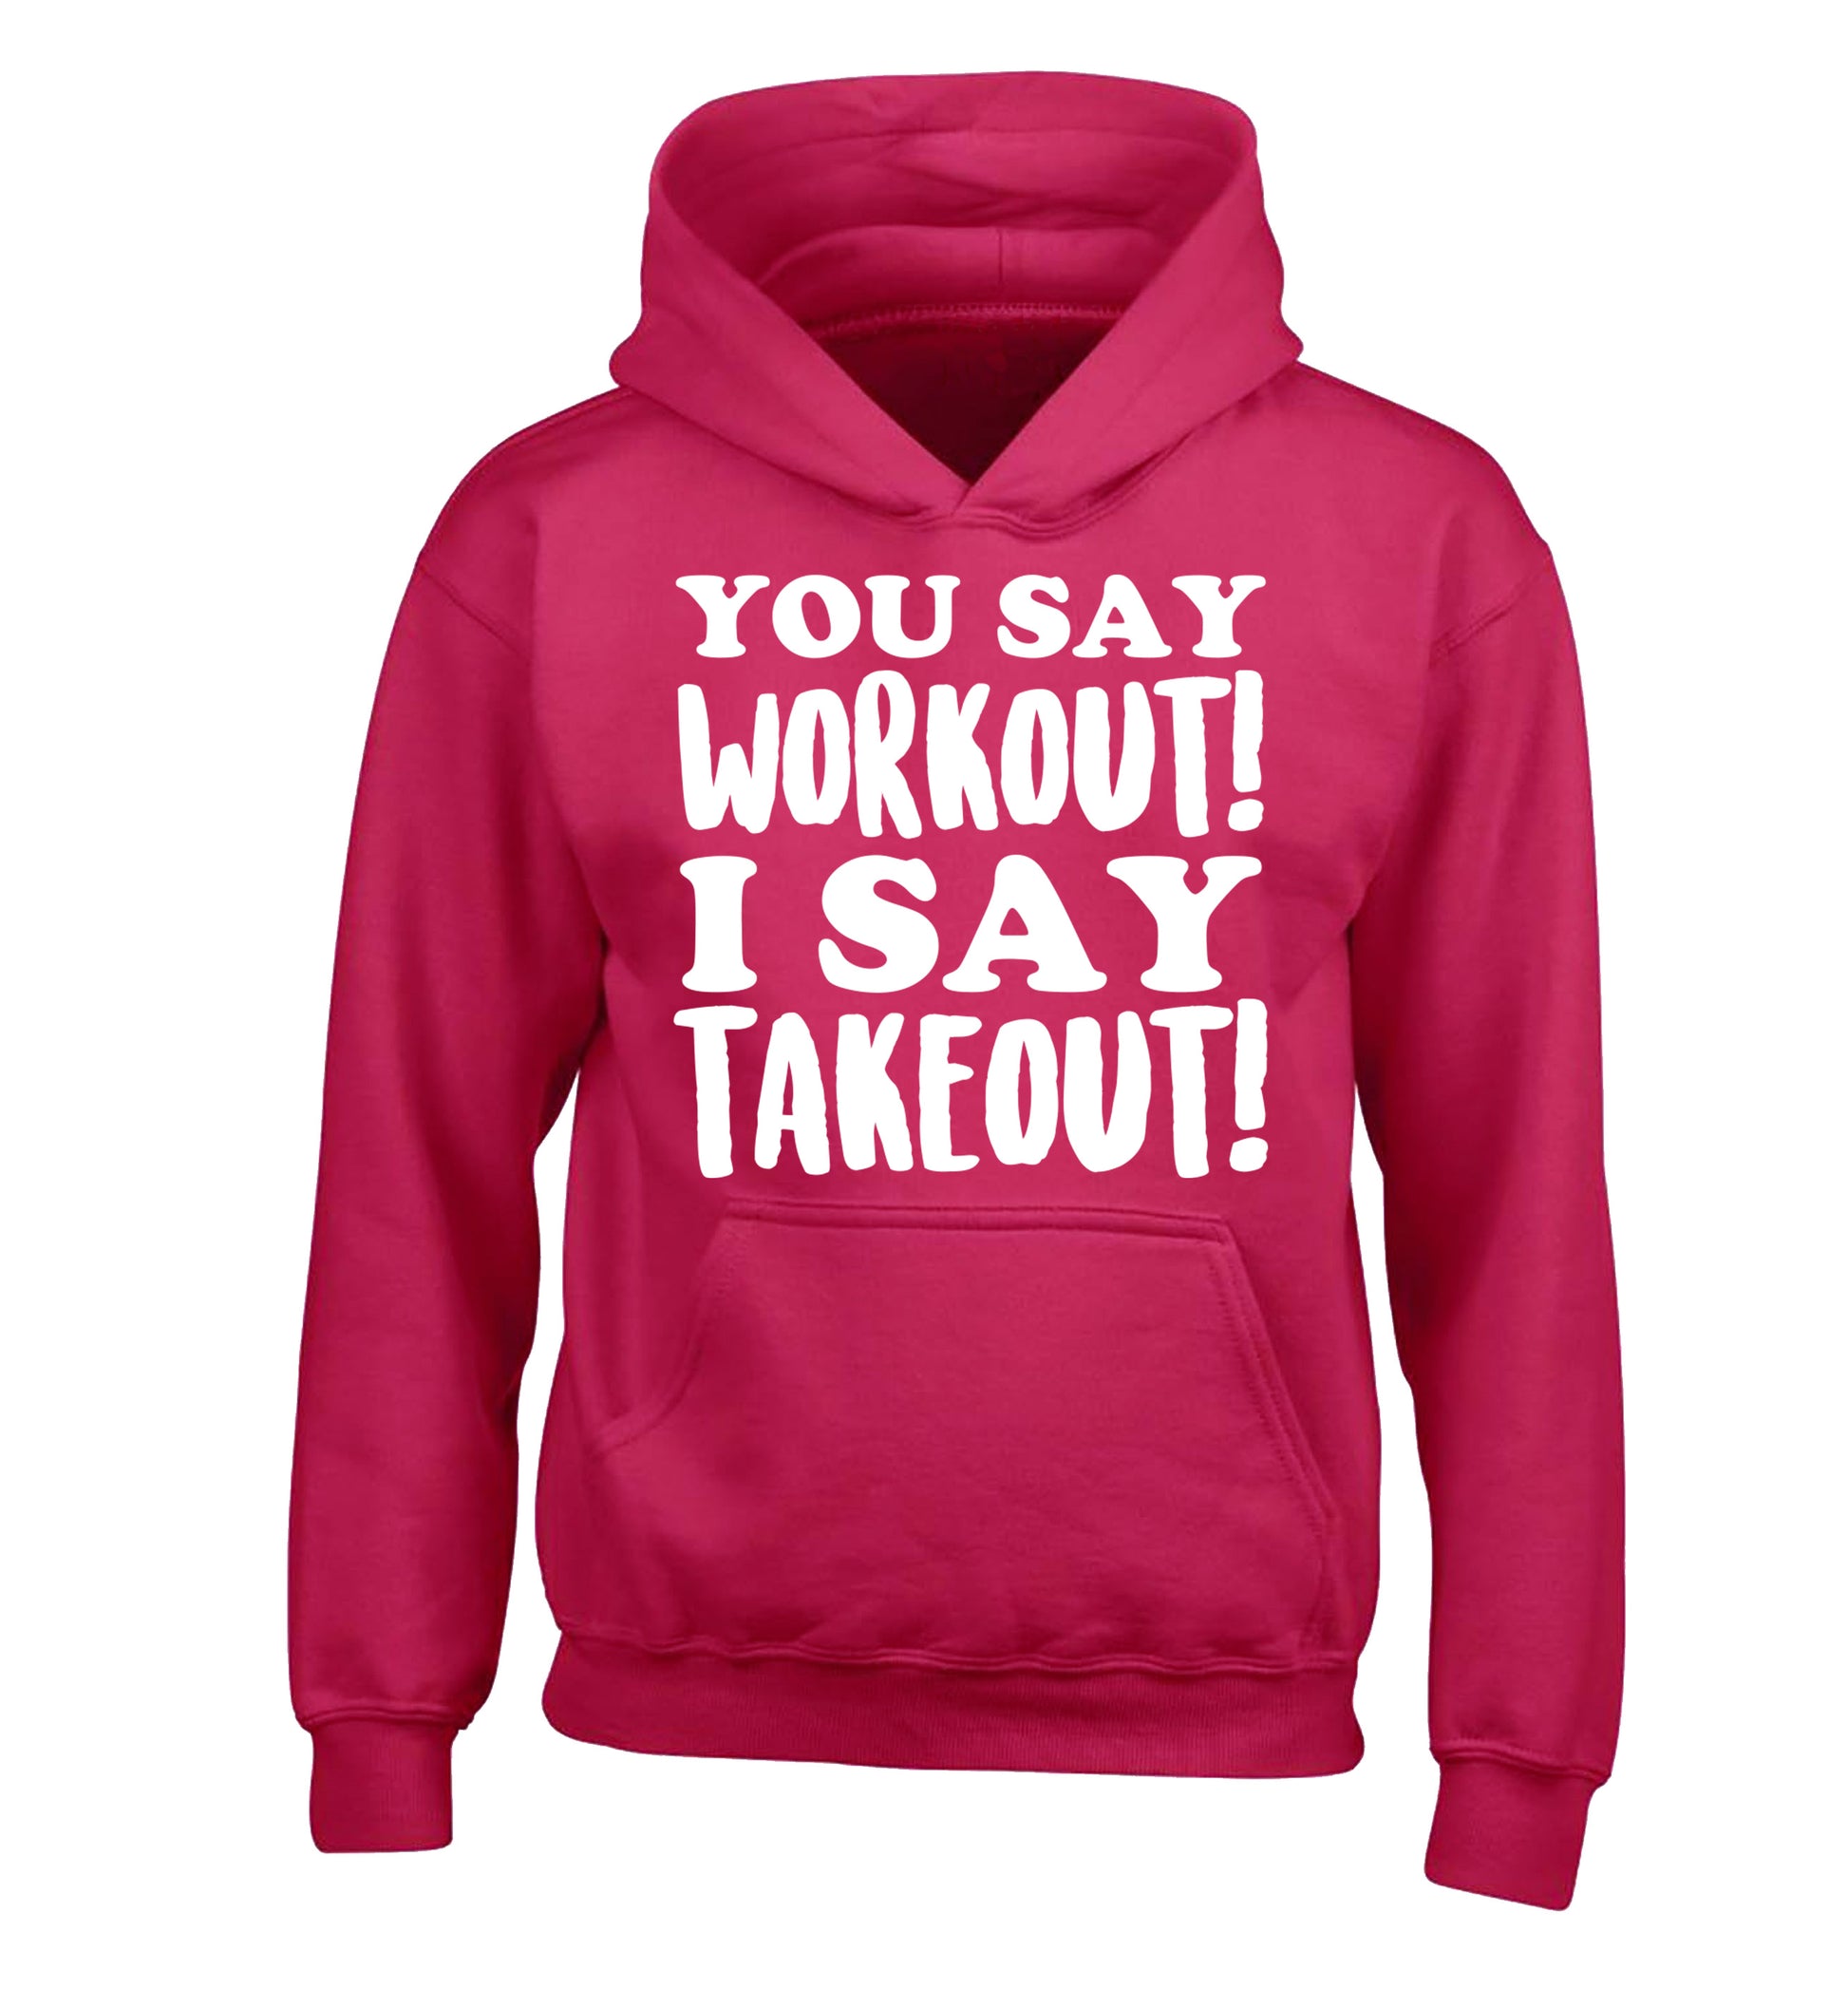 You say workout I say takeout! children's pink hoodie 12-14 Years